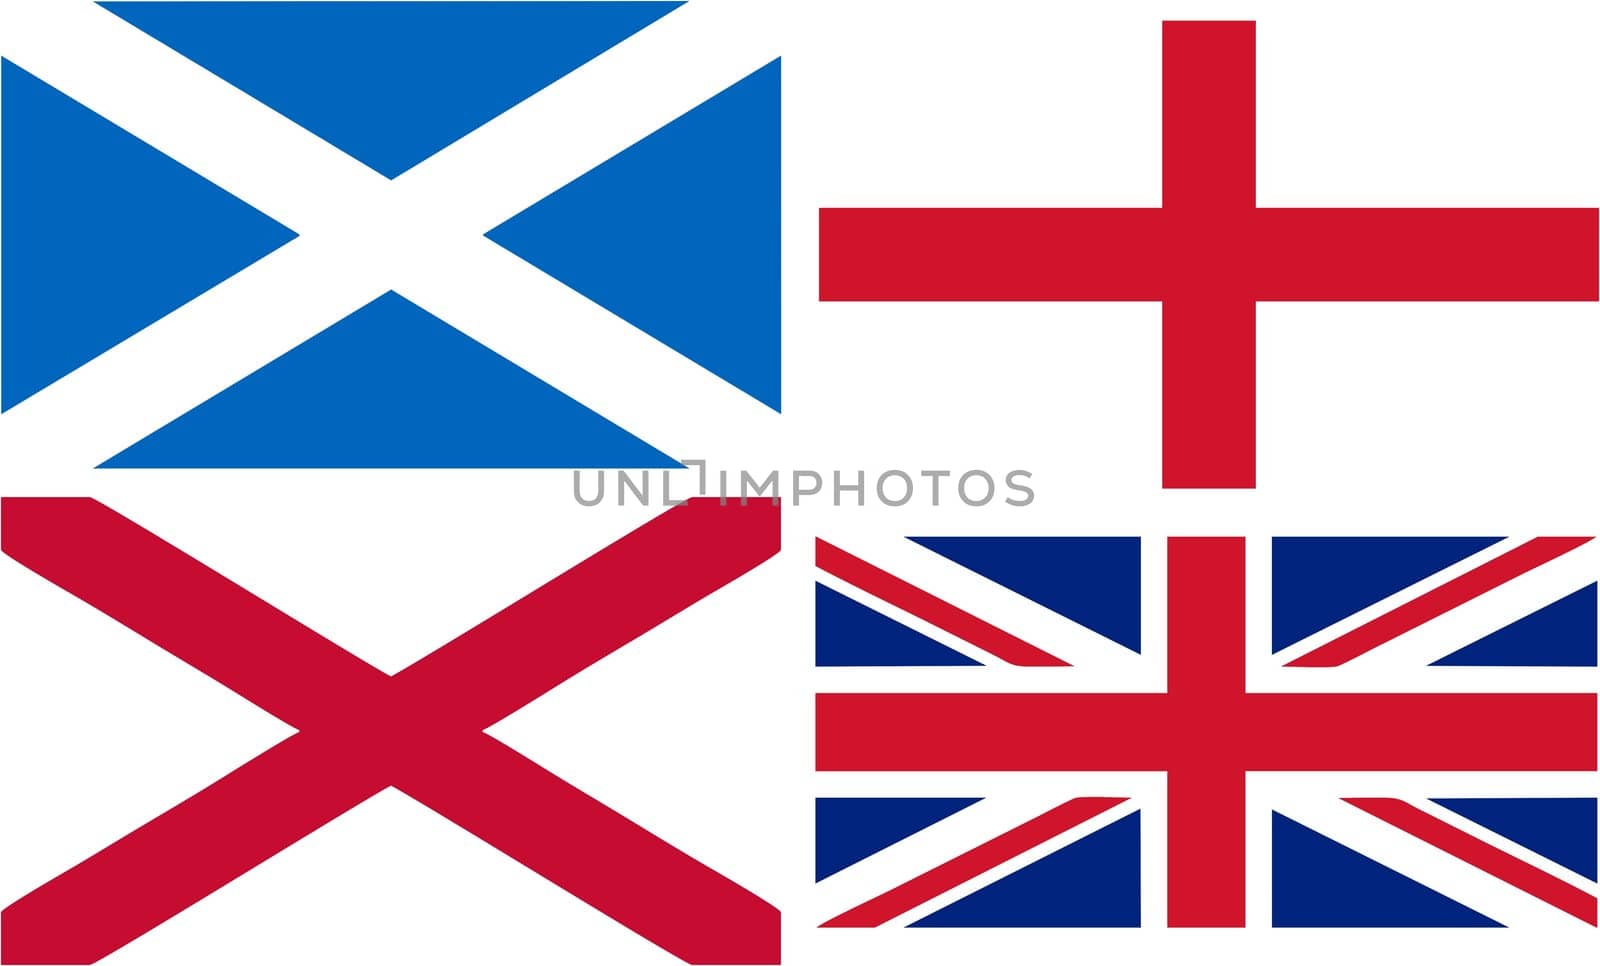 making of the Union Jack flag by paolo77